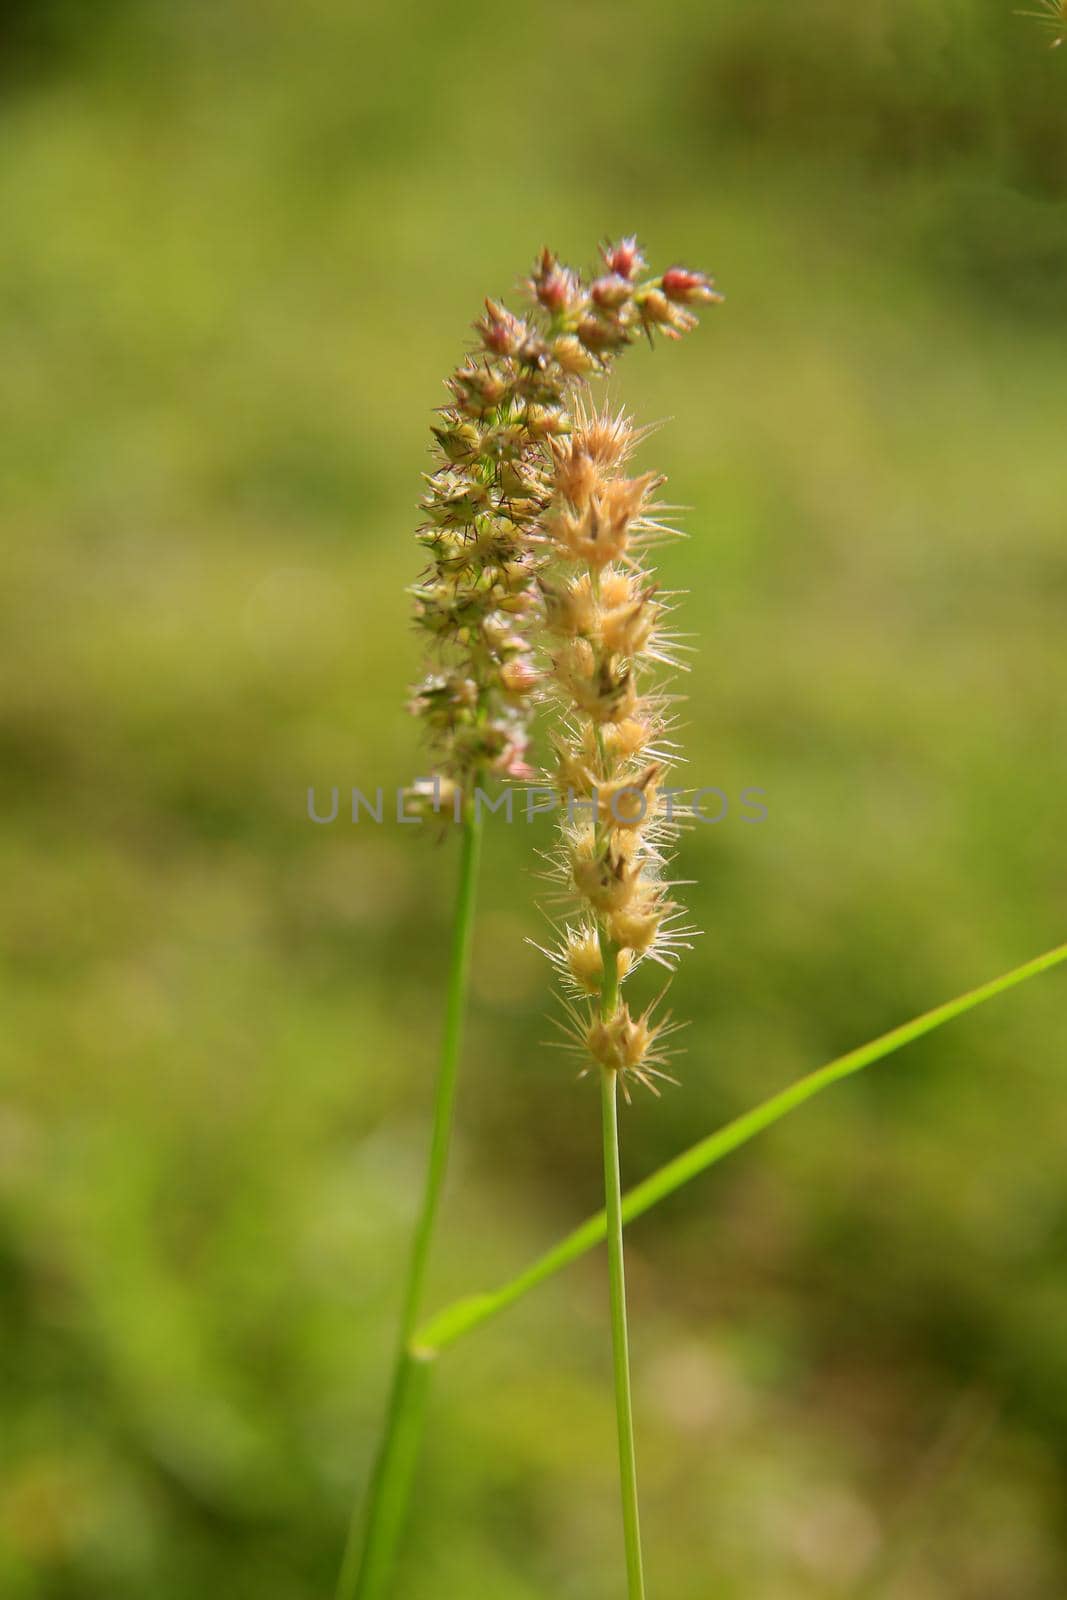 conde, bahia, brazil - january 9, 2022: plant carrapinho grass - Cenchrus echinatus - in a rural area in the city of Conde.